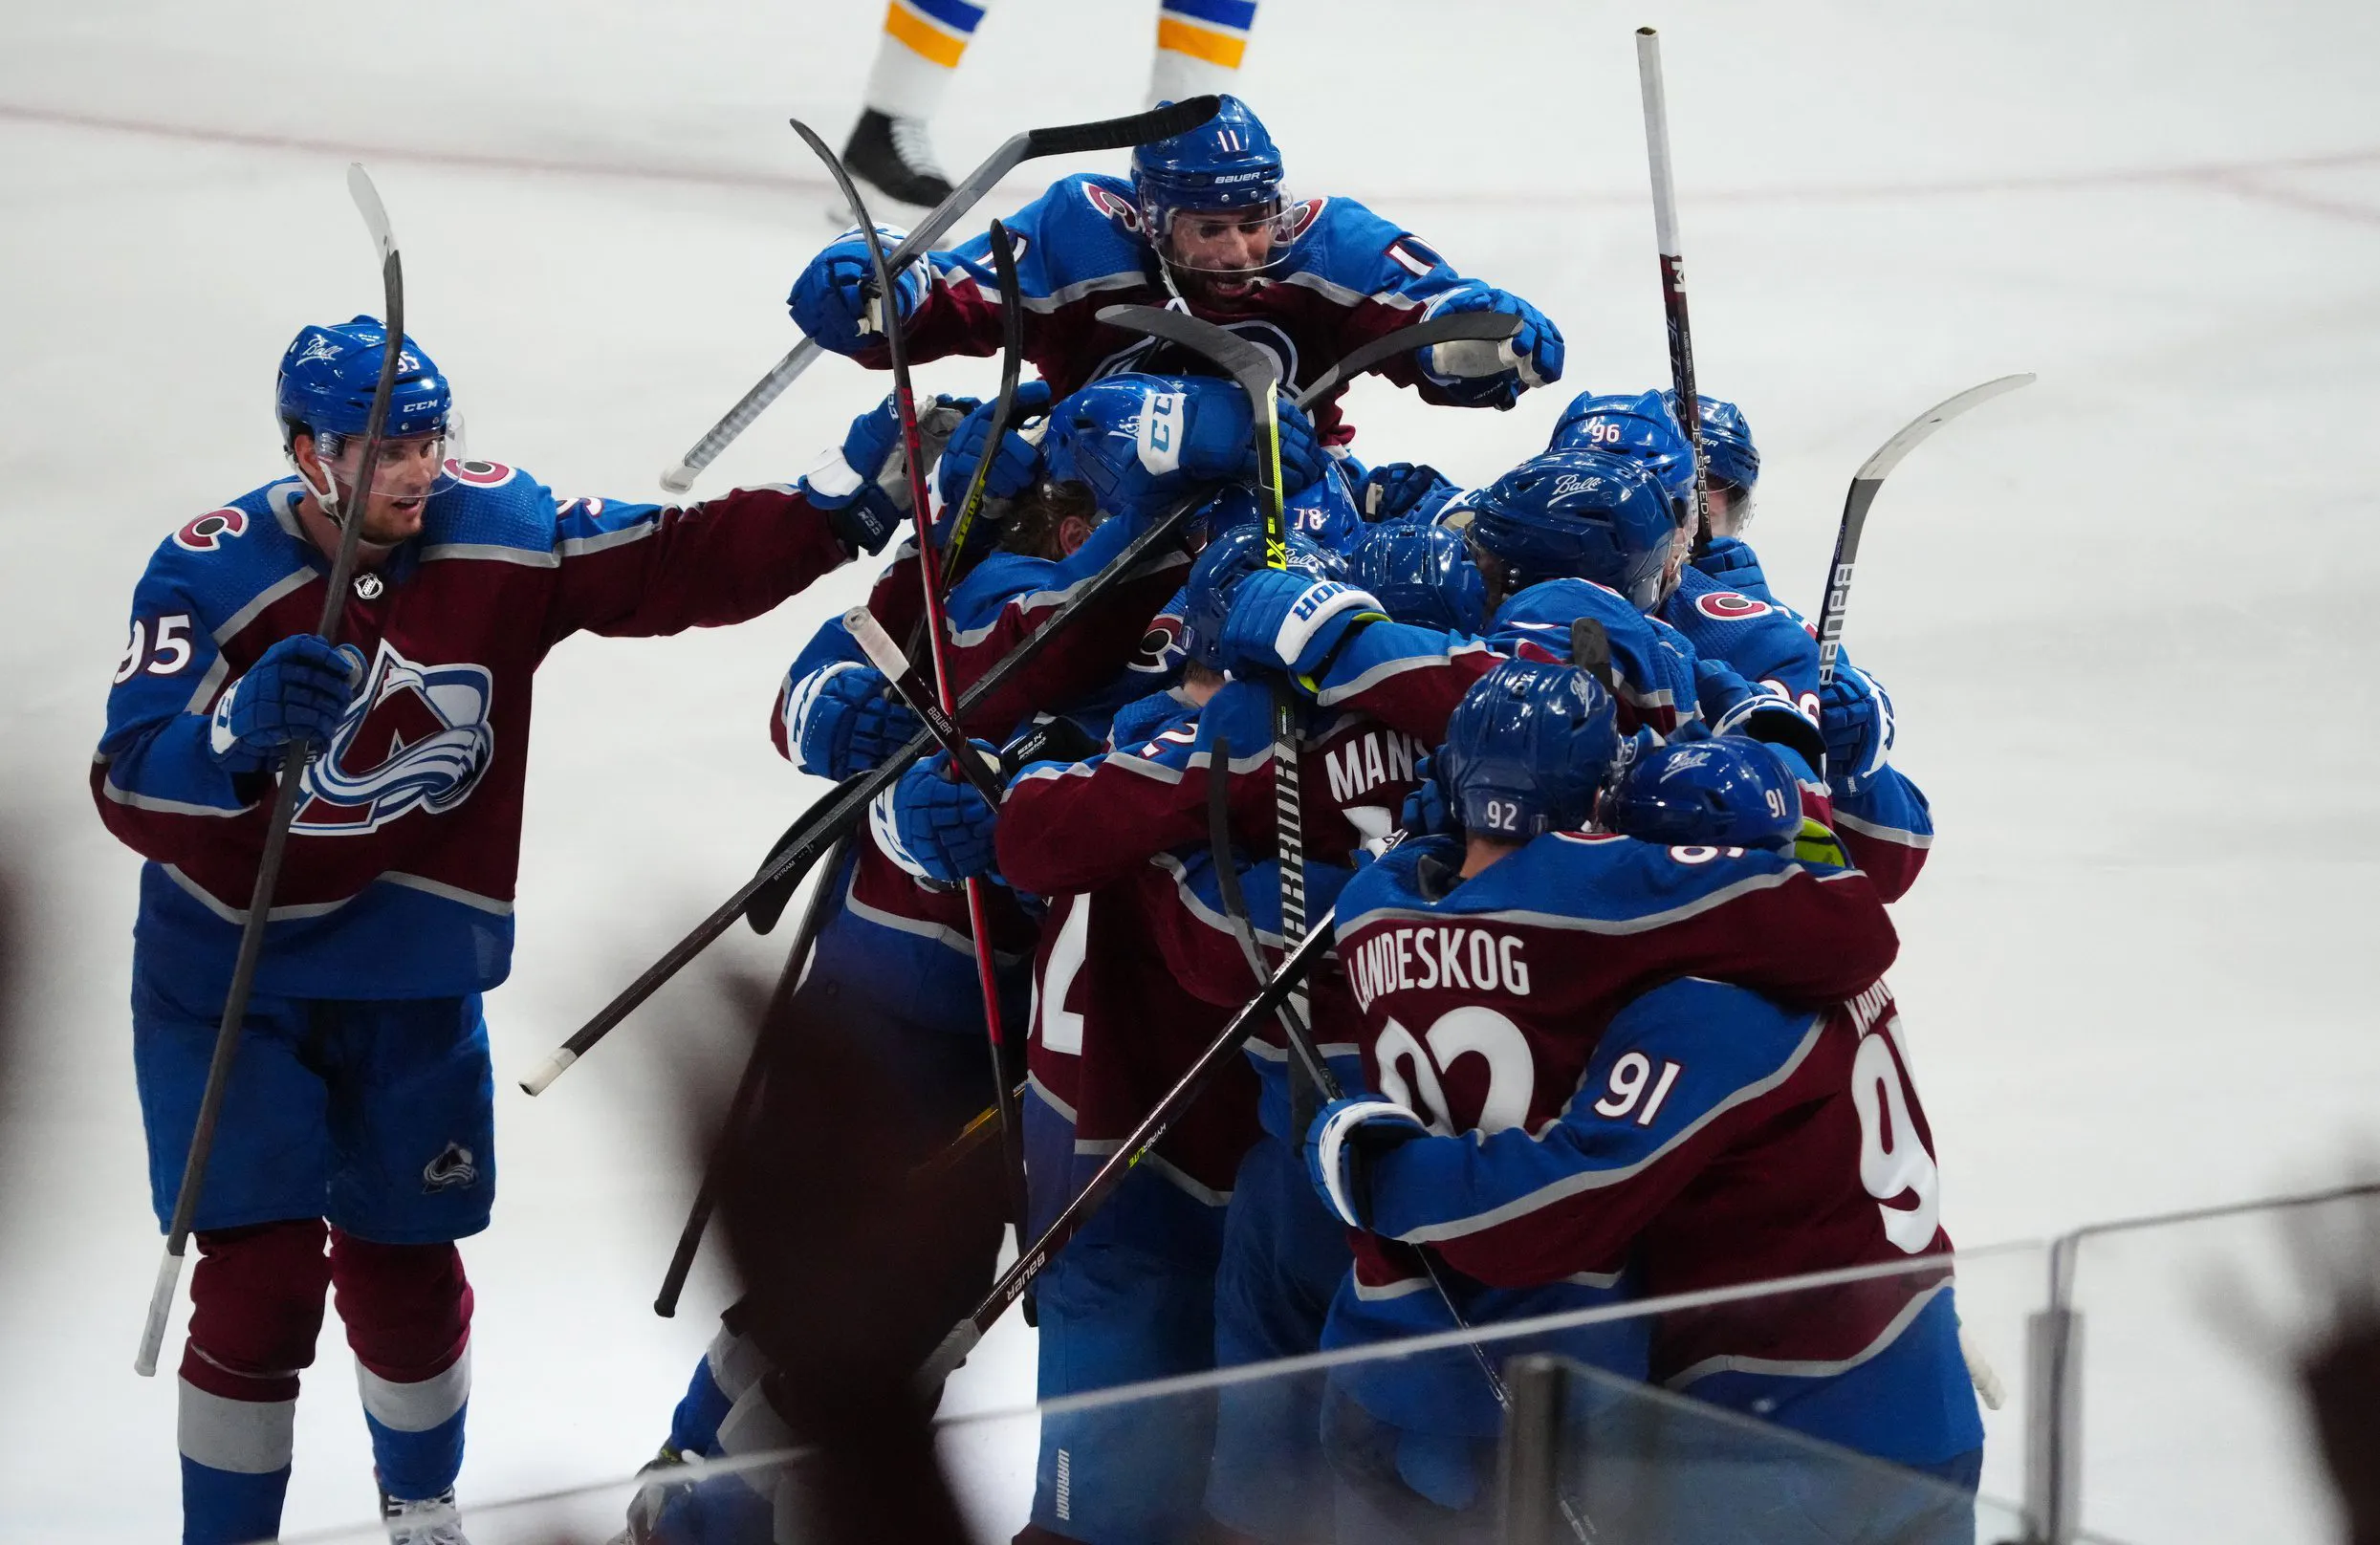 Stanley Cup Playoffs Day 15: Tampa Bay Lightning power play dominates, Colorado Avalanche need overtime to take Game 1